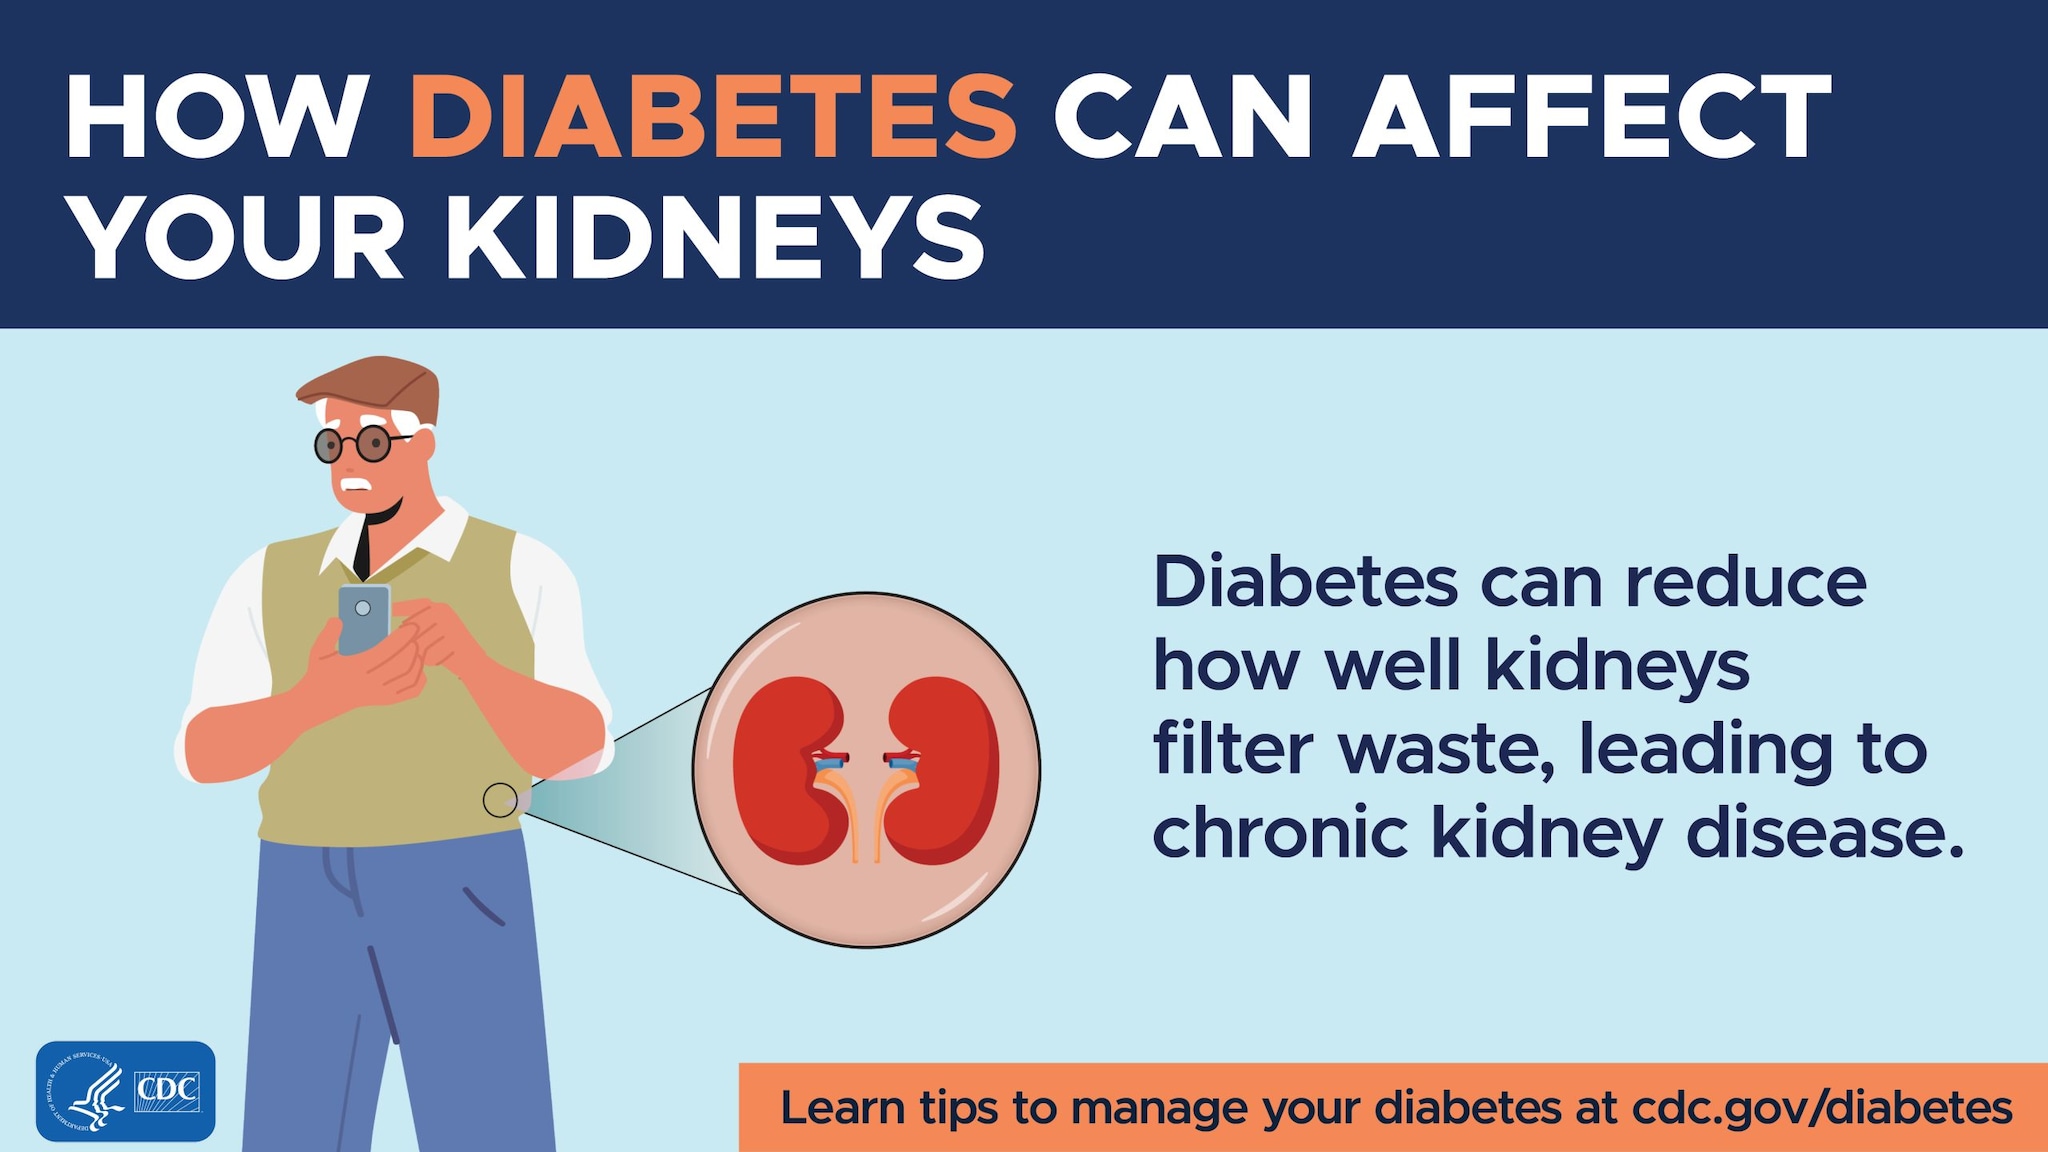 Diabetes can reduce how well kidneys filter waste, leading to chronic kidney disease.